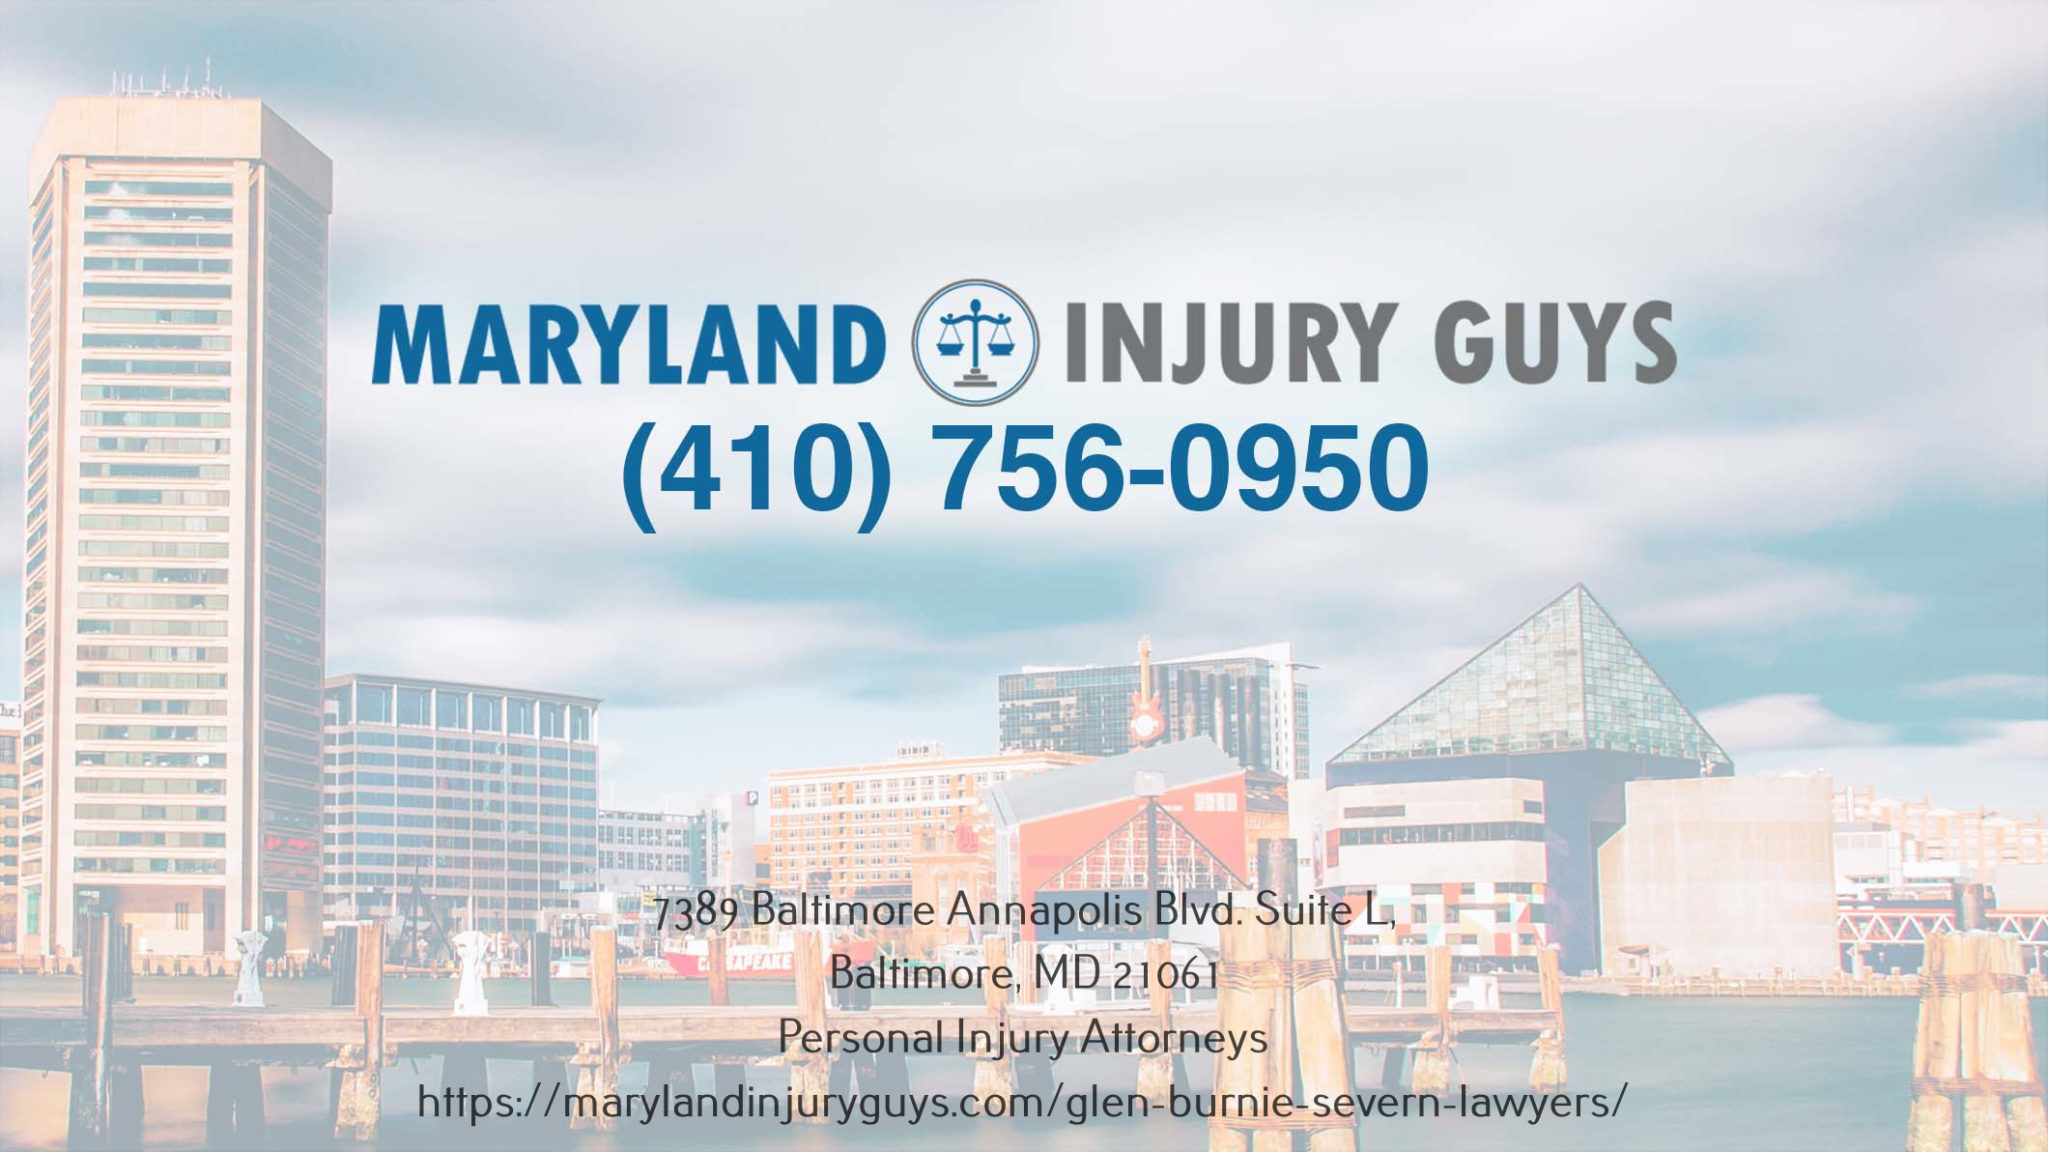 Glen Burnie Law Firm Seeks Justice For Medical Negligence & Birth Injury Victims